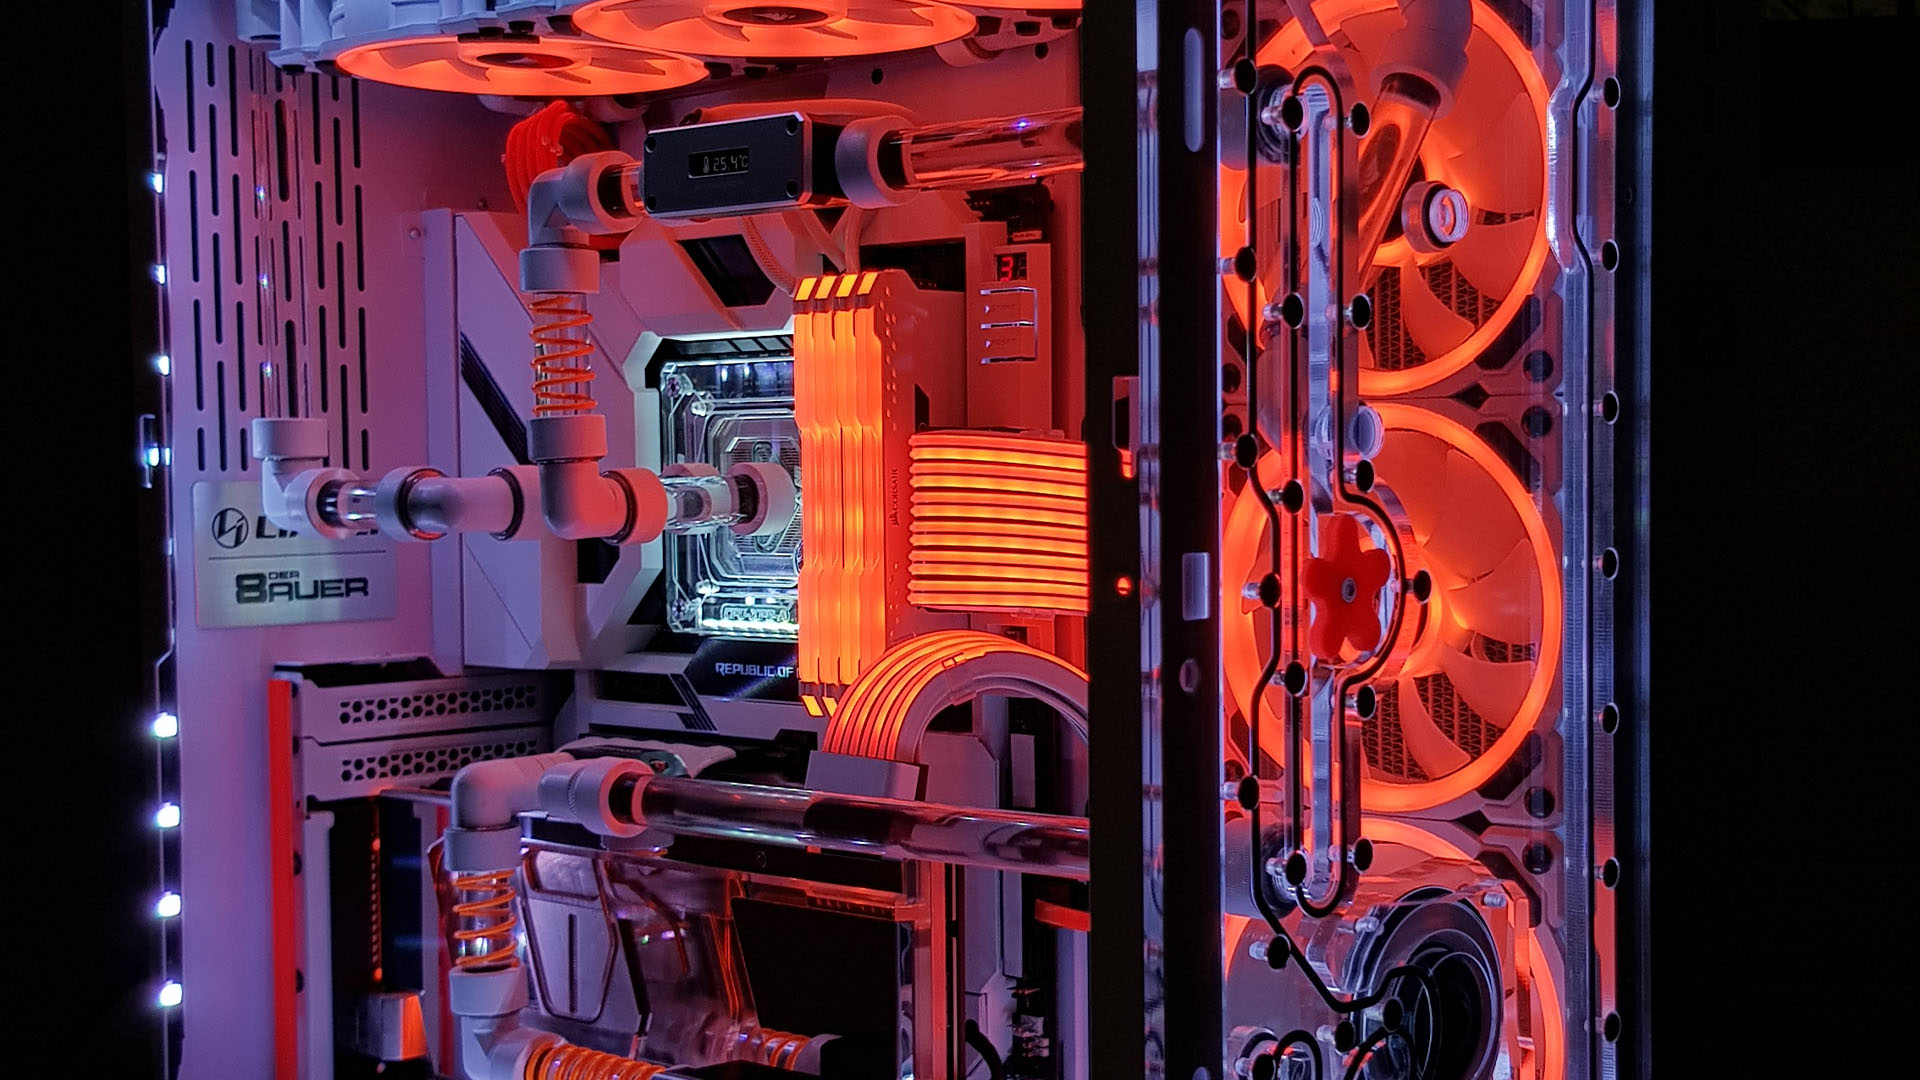 The star wars gaming PC is bathed in an orange RGB light